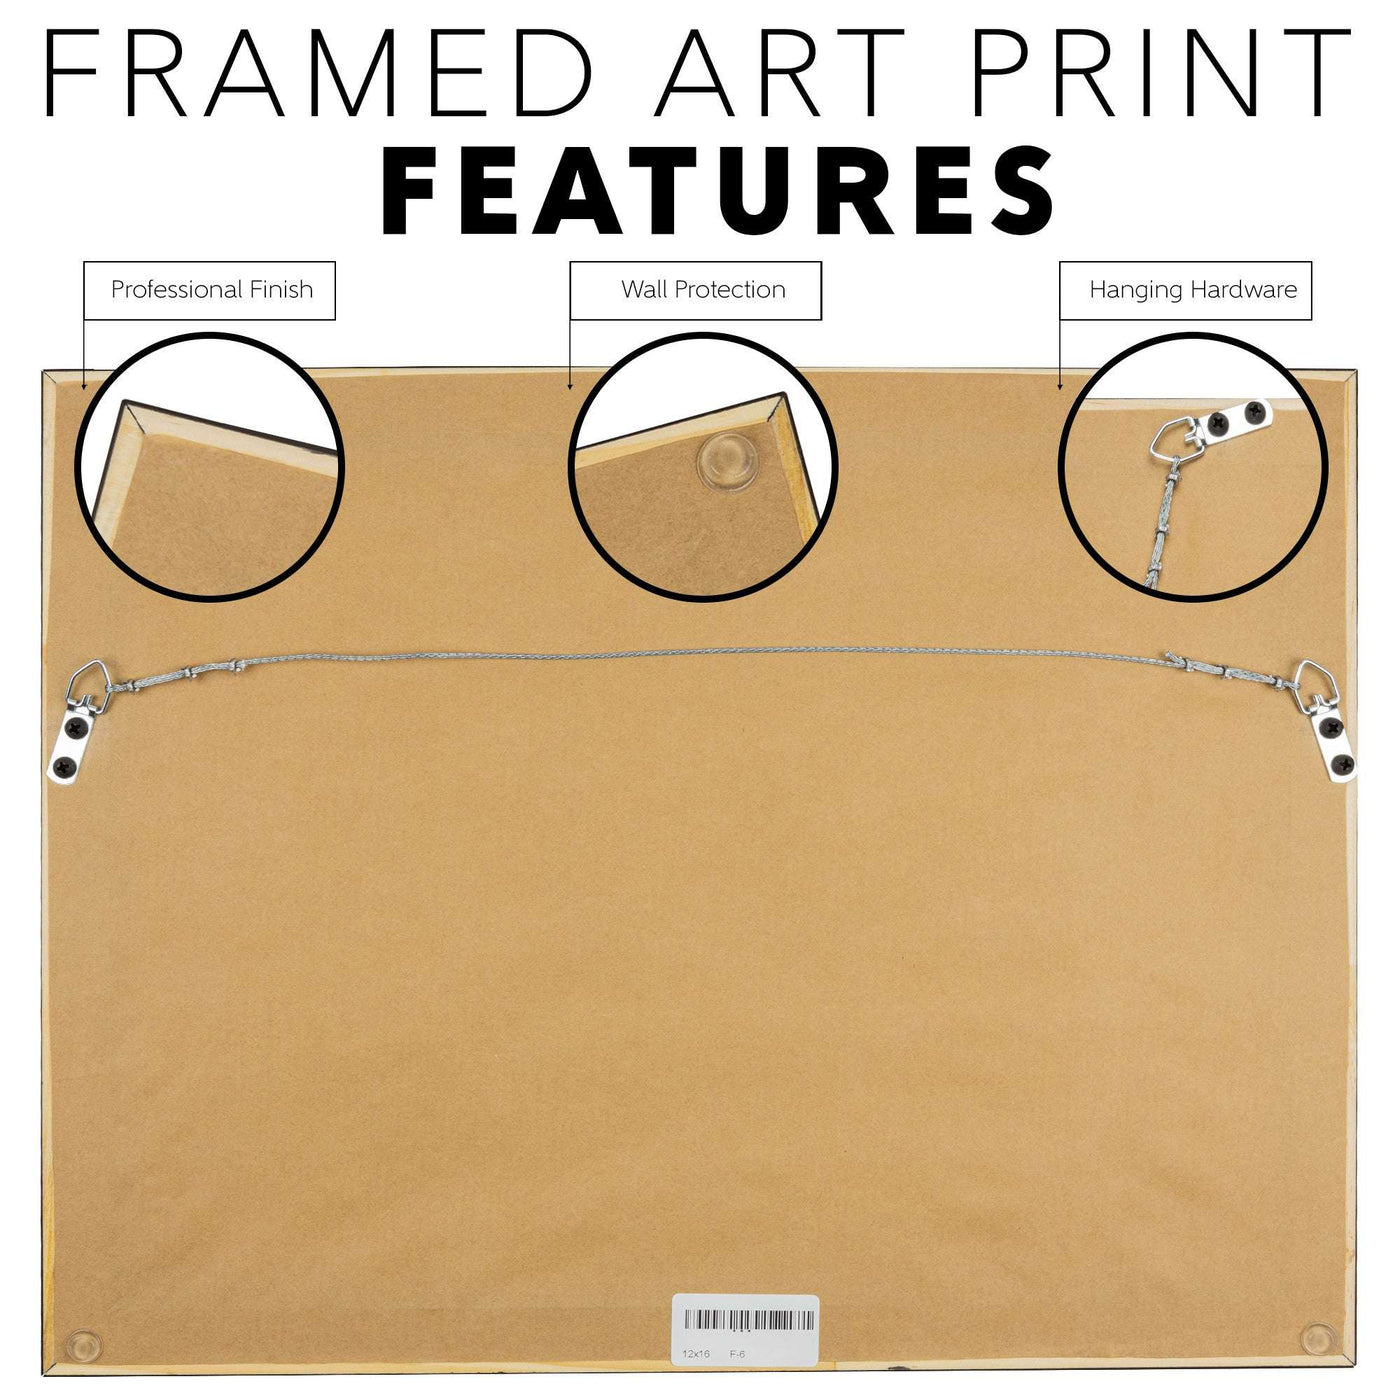 Back view of a Framed Owl Art Print detailing its features: professional finish, wall protection, and included hanging hardware.